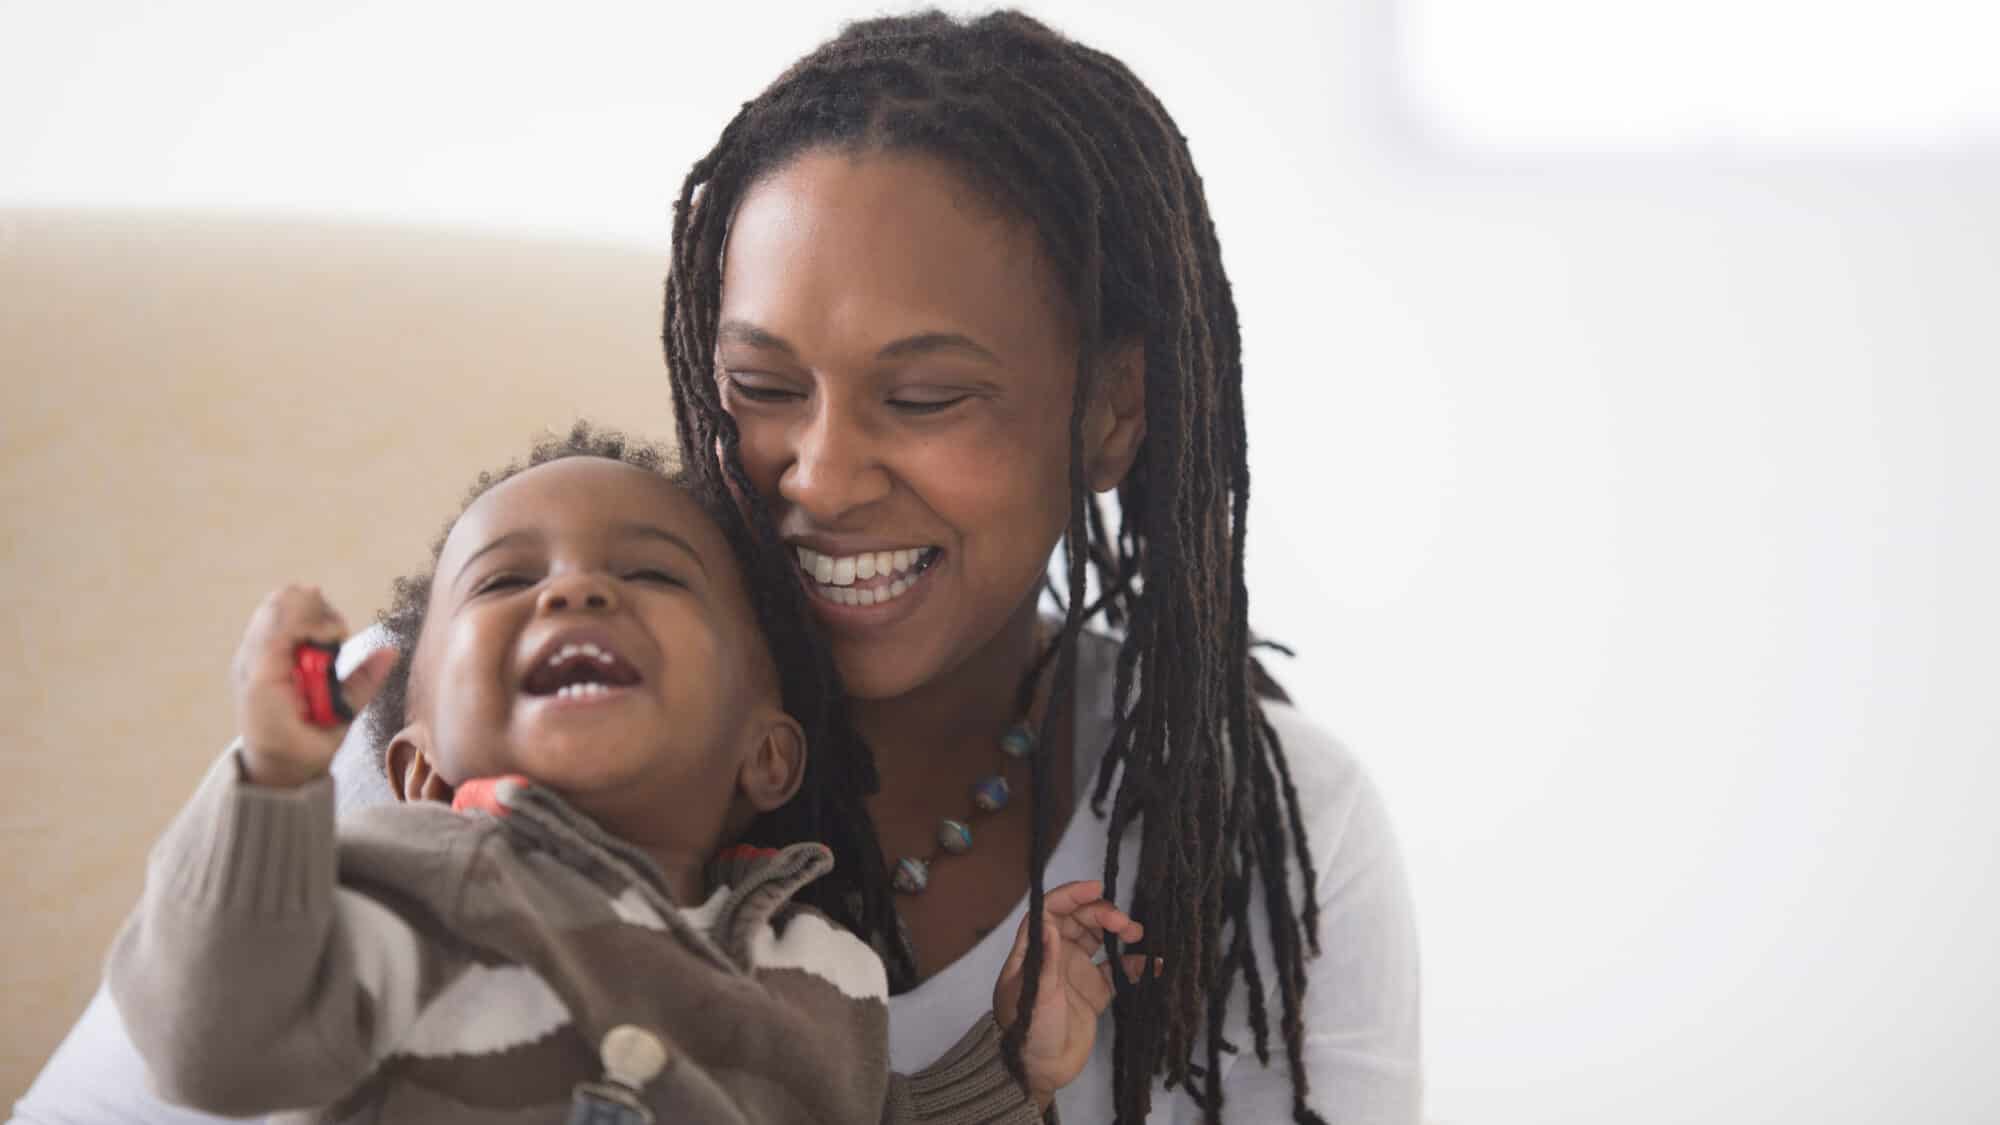 Young mother laughs and plays with her smiling daughter. Baltimore Medical System provides comprehensive healthcare to people of all ages.